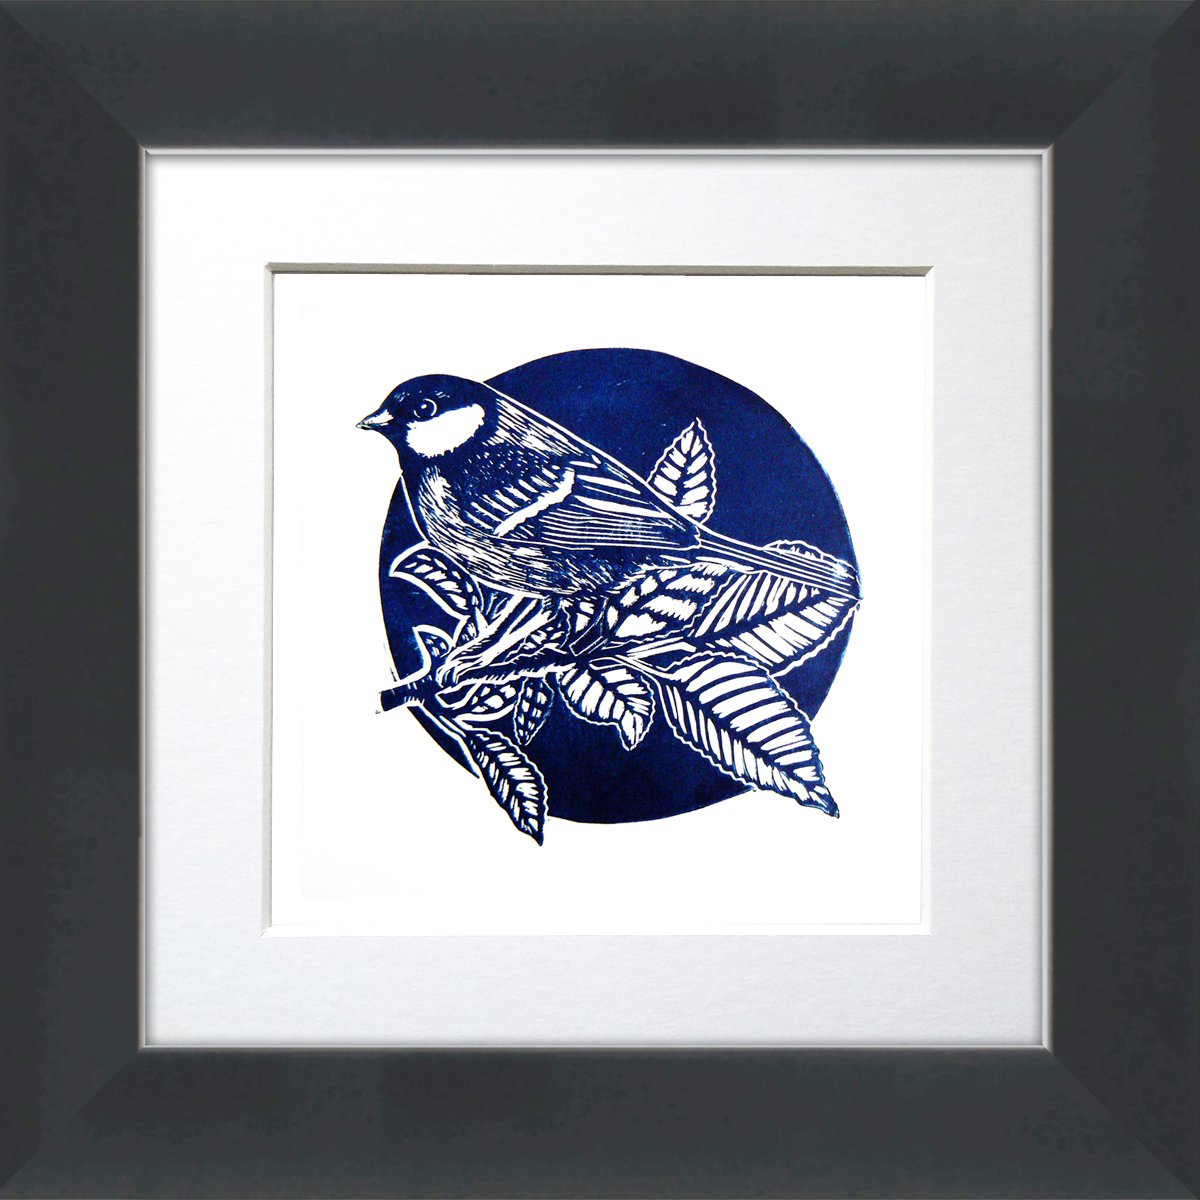 Garden Friends Linocut - framed and ready to hang by Carolynne Coulson